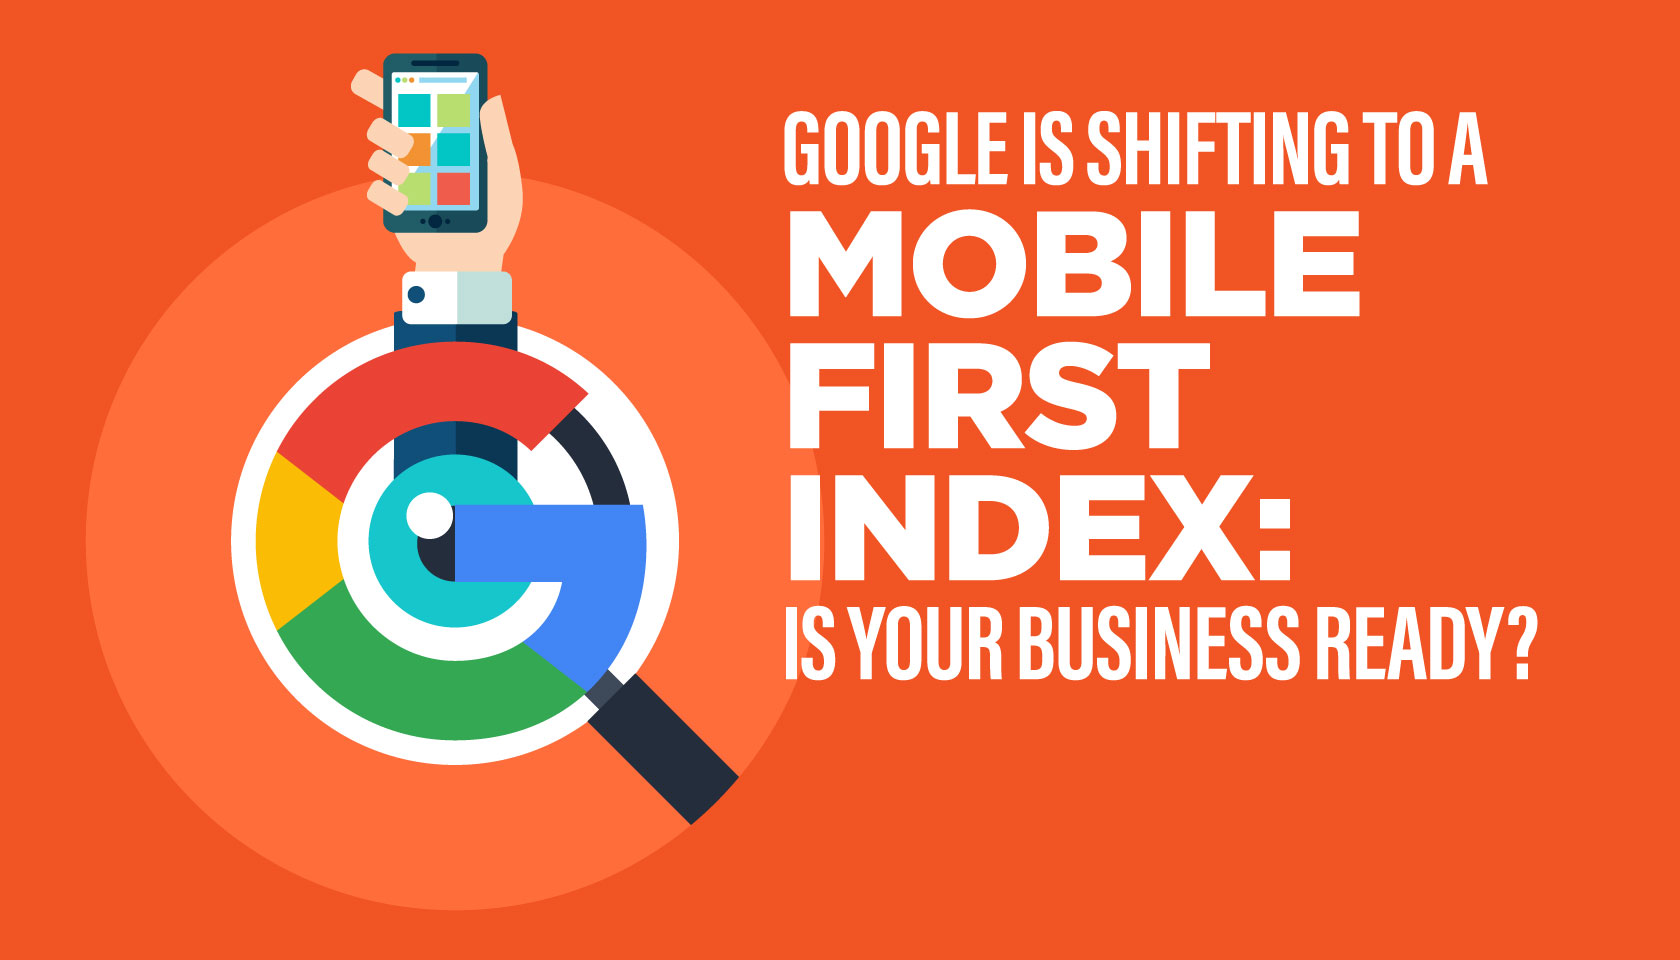 Google Mobile First Index